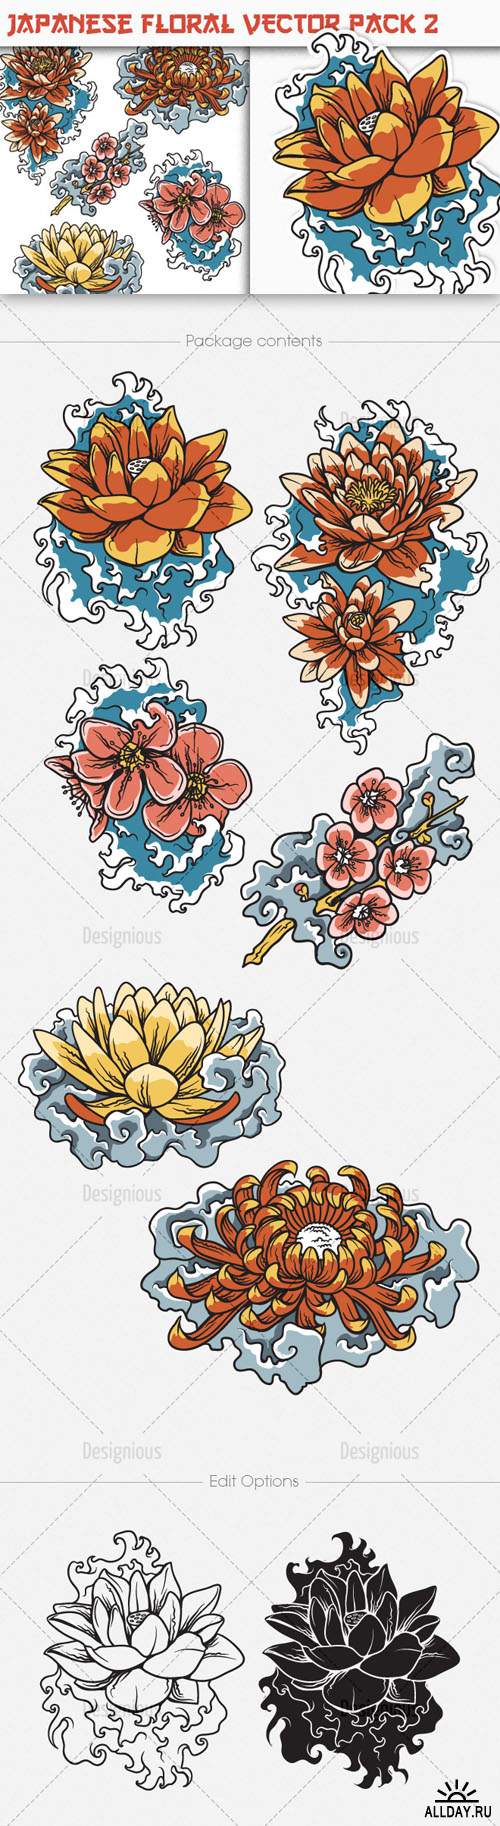 Japanese Flowers Photoshop Vector Pack 2